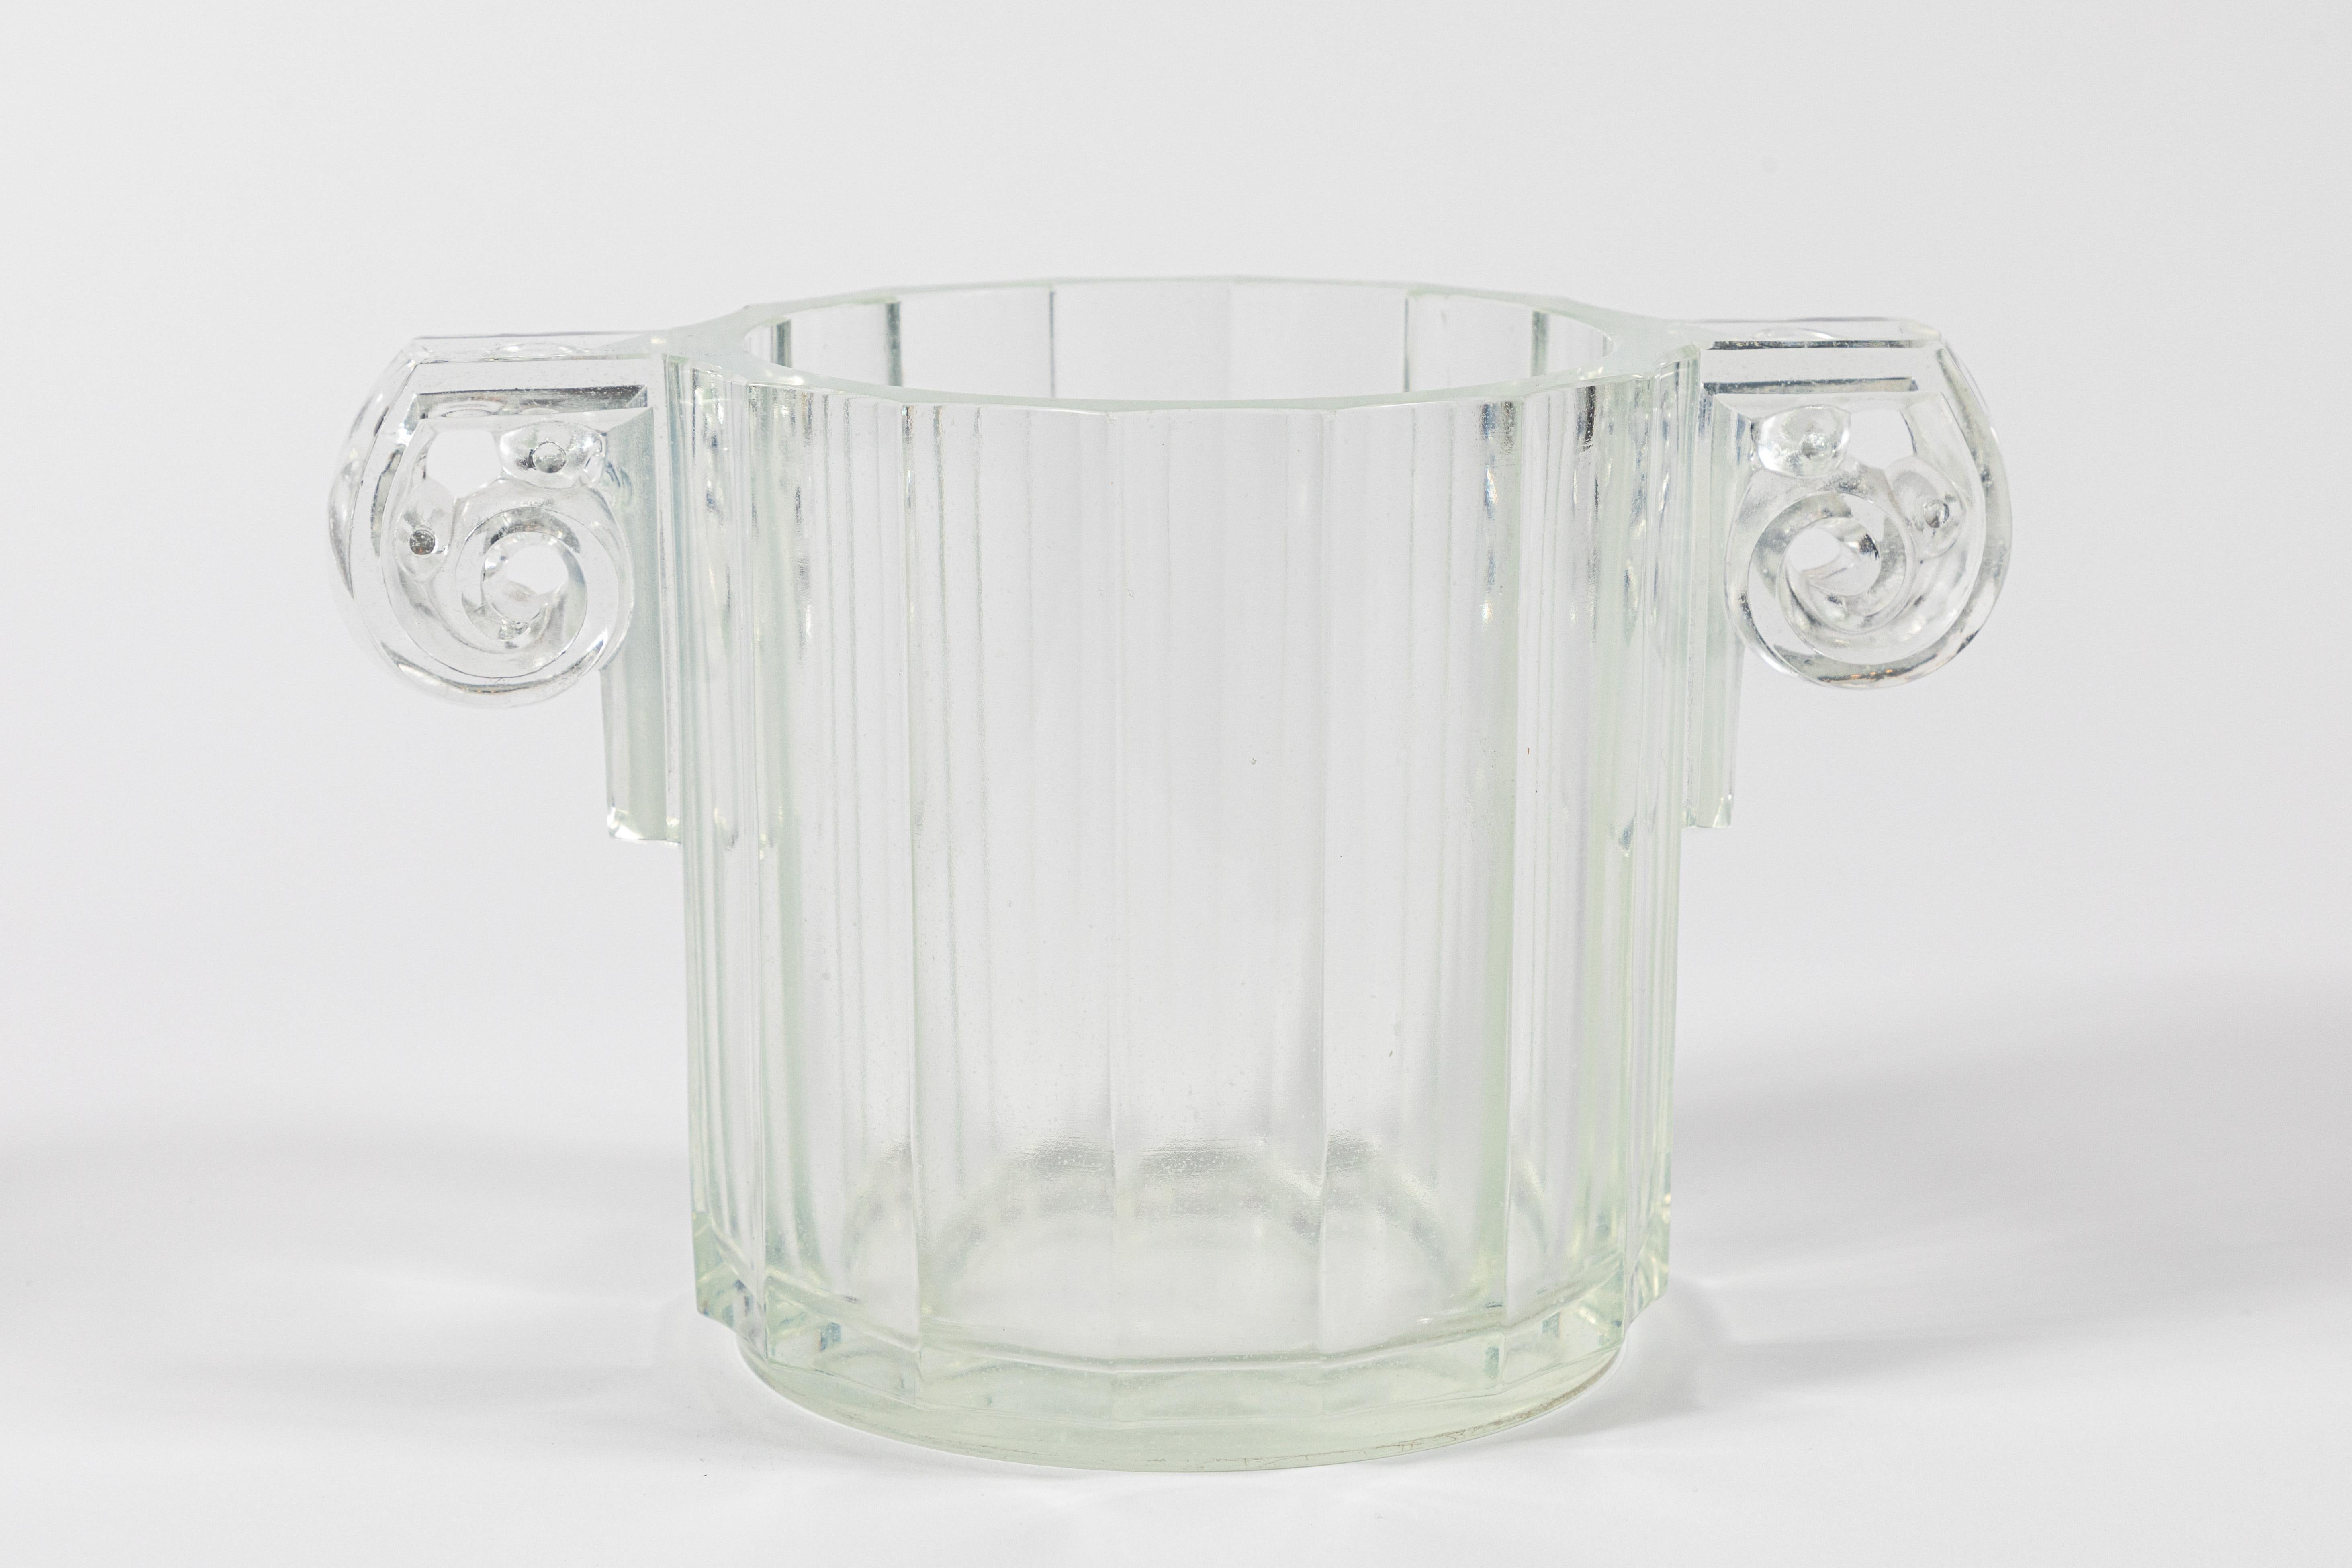 This is a French Art Deco ice bucket, wine cooler, or short vase in pressed opalescent glass. Classically inspired, it's a 